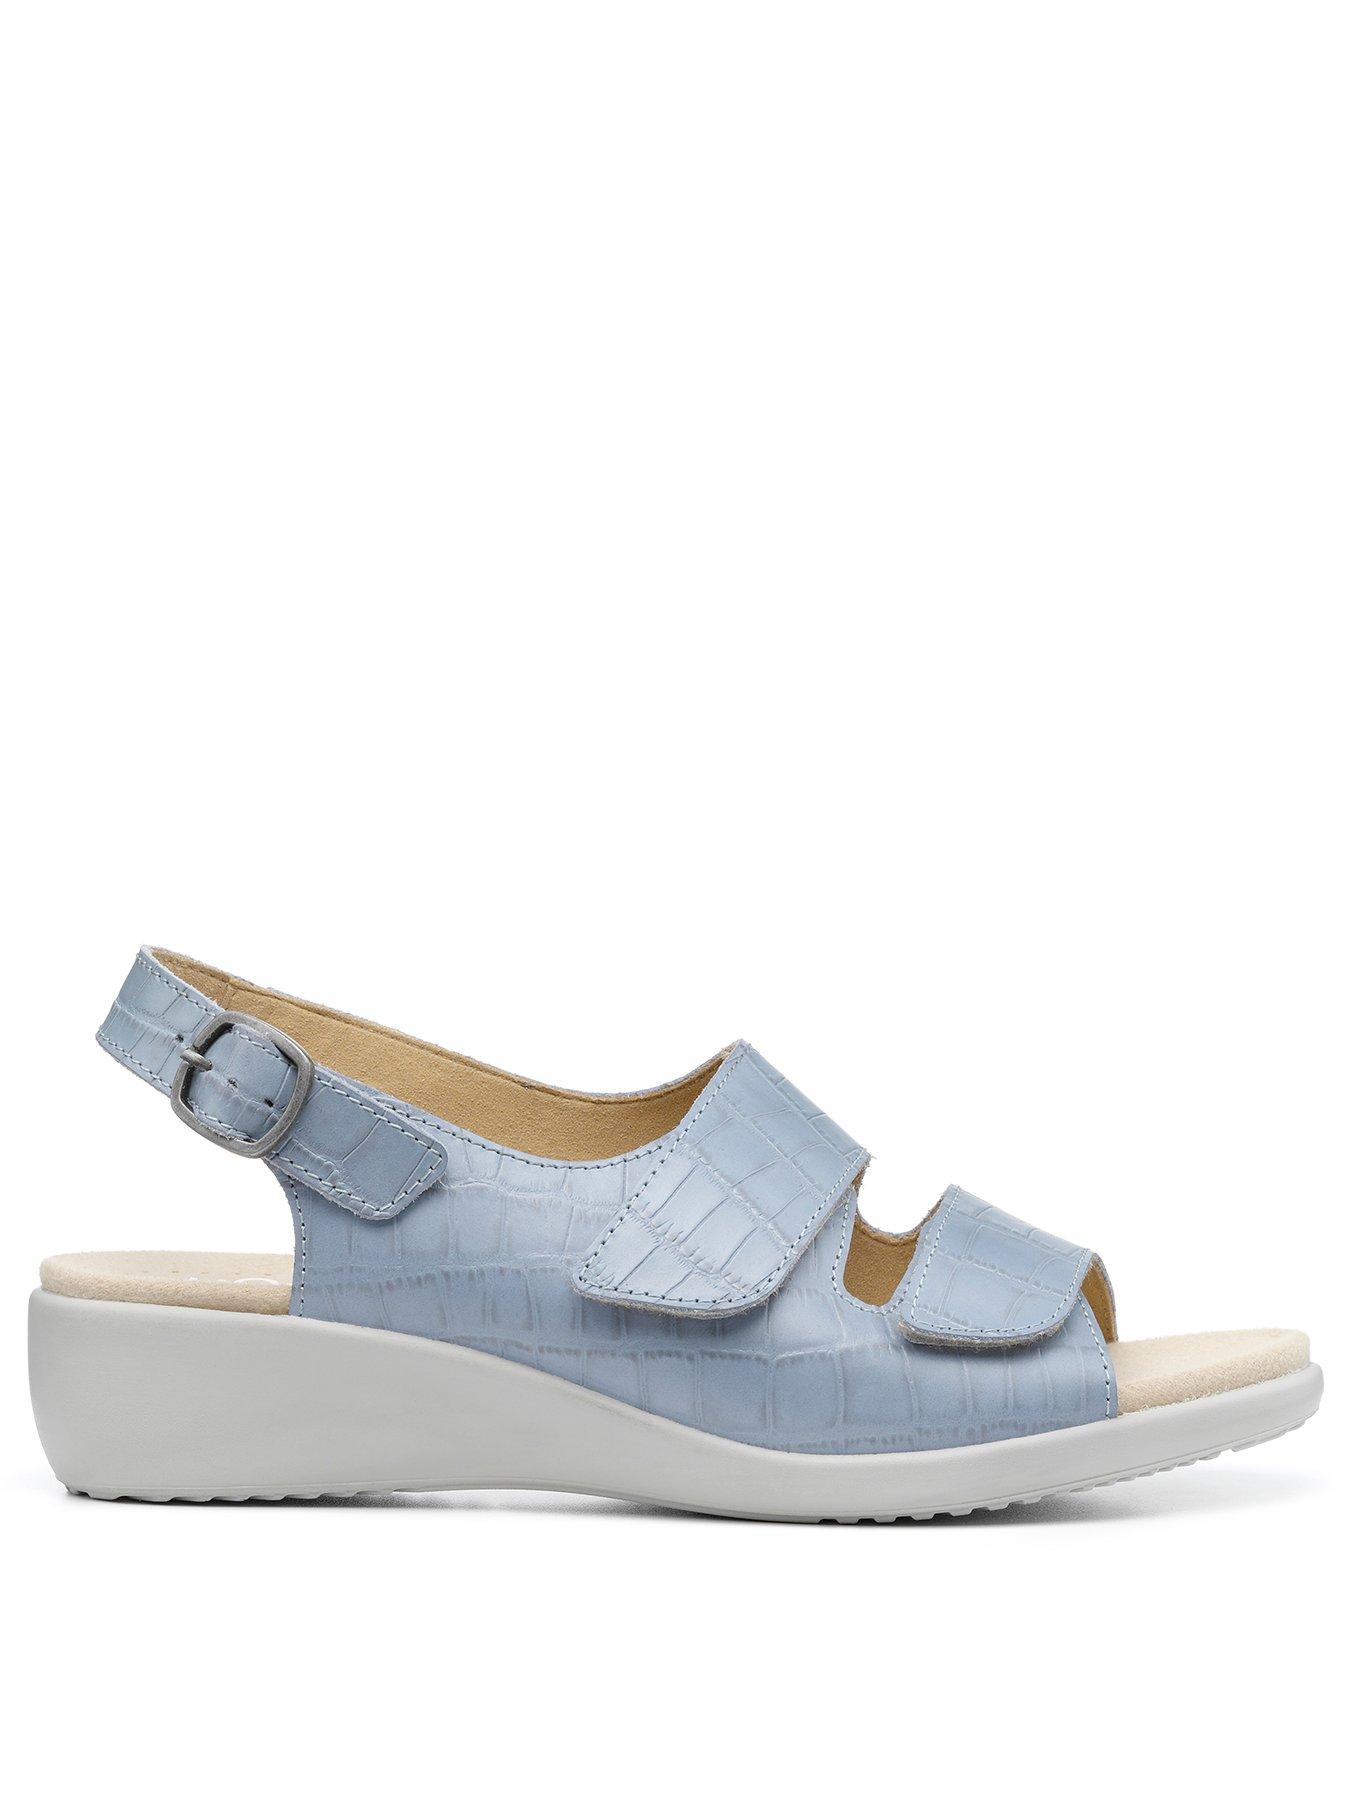 Shoes & boots Easy II Wedge Sandal - Blue